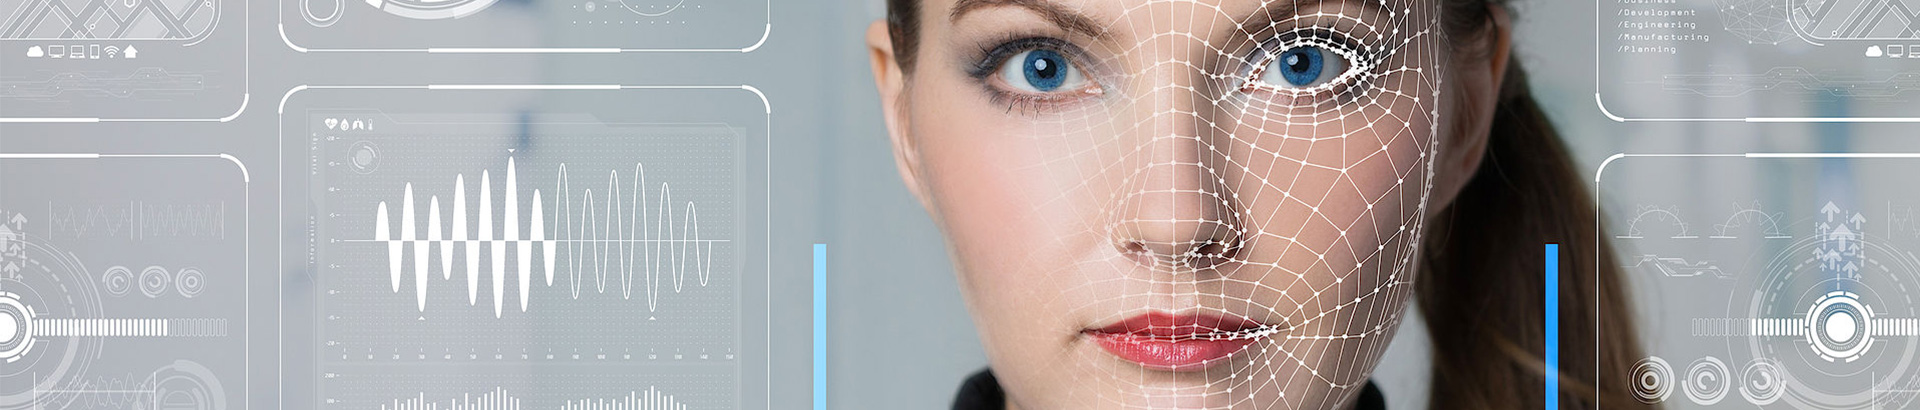 Facing the Digital Age, Facial Recognition Technology Has Improved